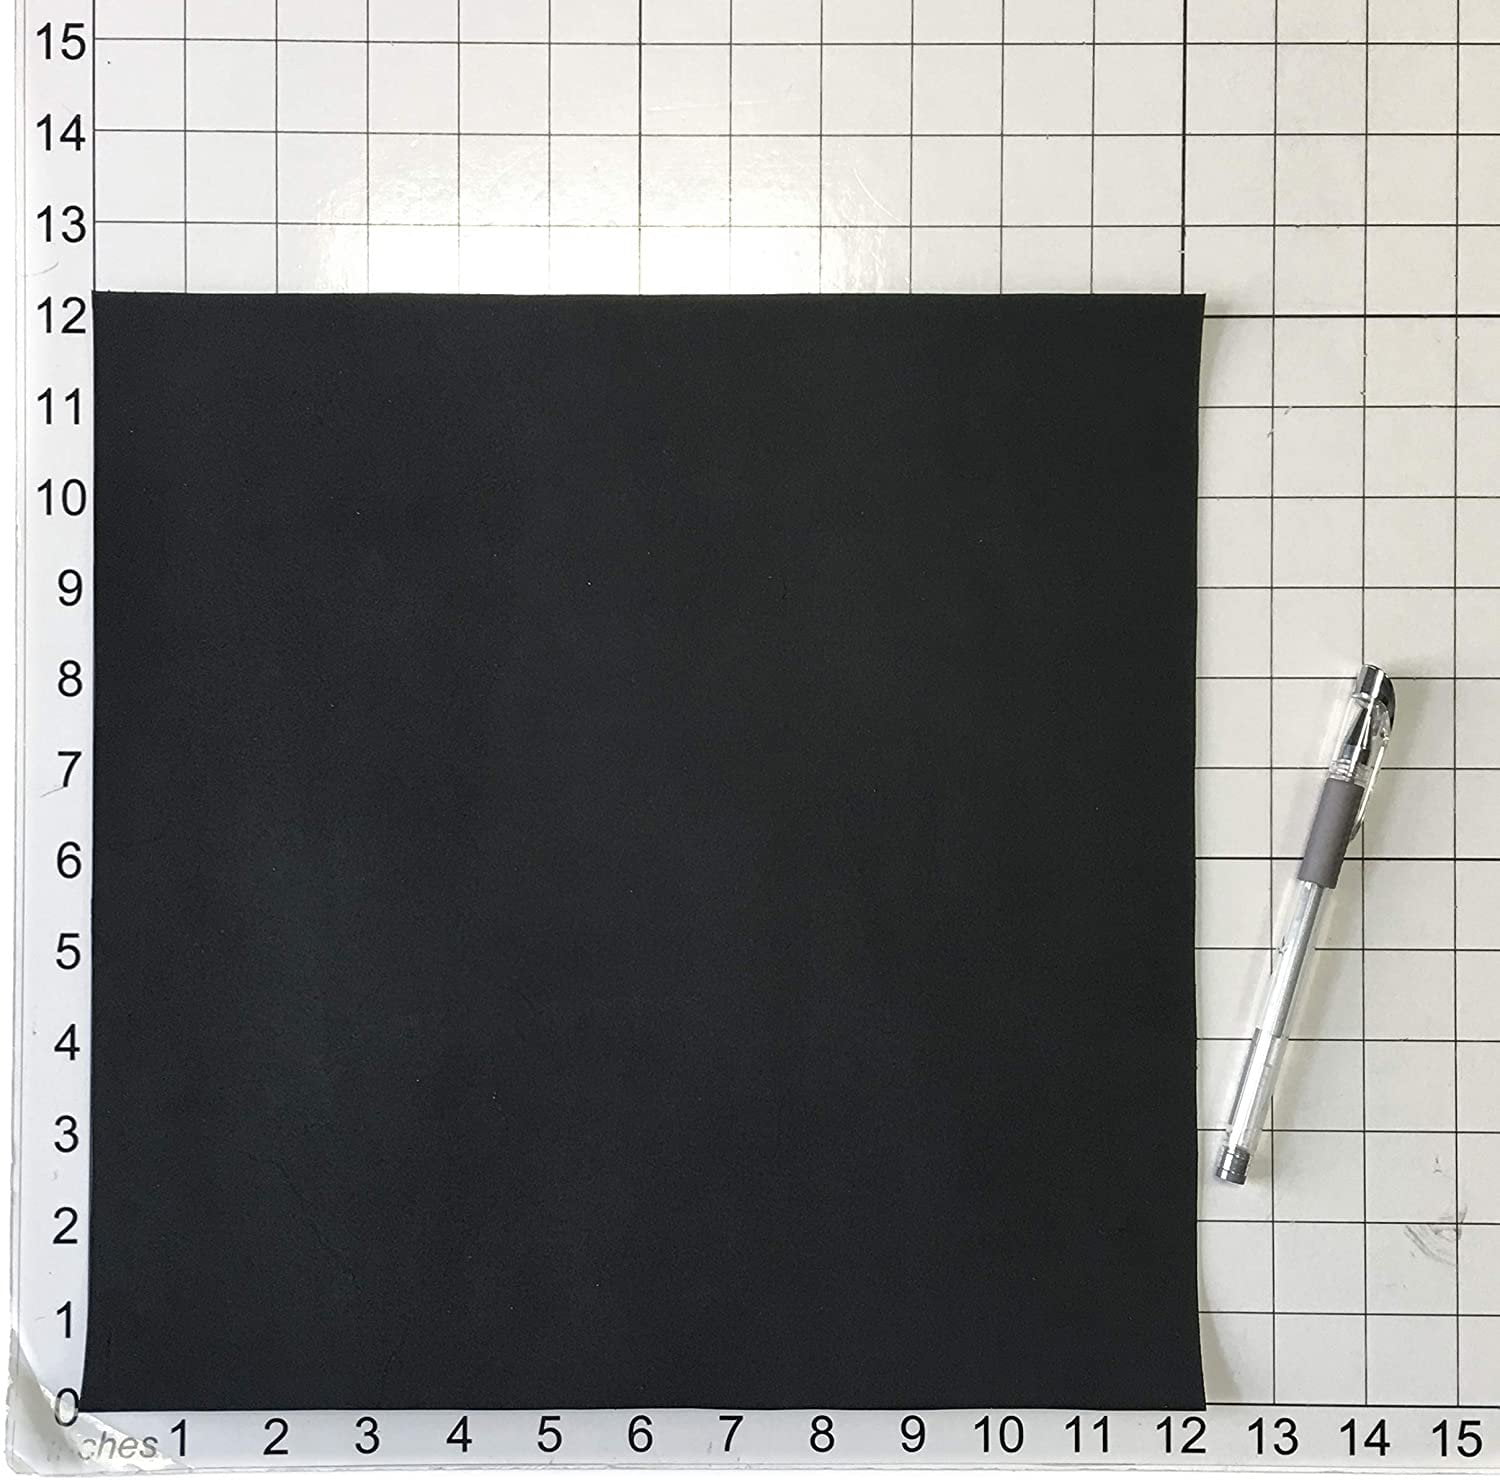 Black Genuine Leather for Crafts: Real Black Lambskin Leather Sheet for  Crafting, Sewing and Personalized Leather Projects (Black, 12x18 Inches  Large)